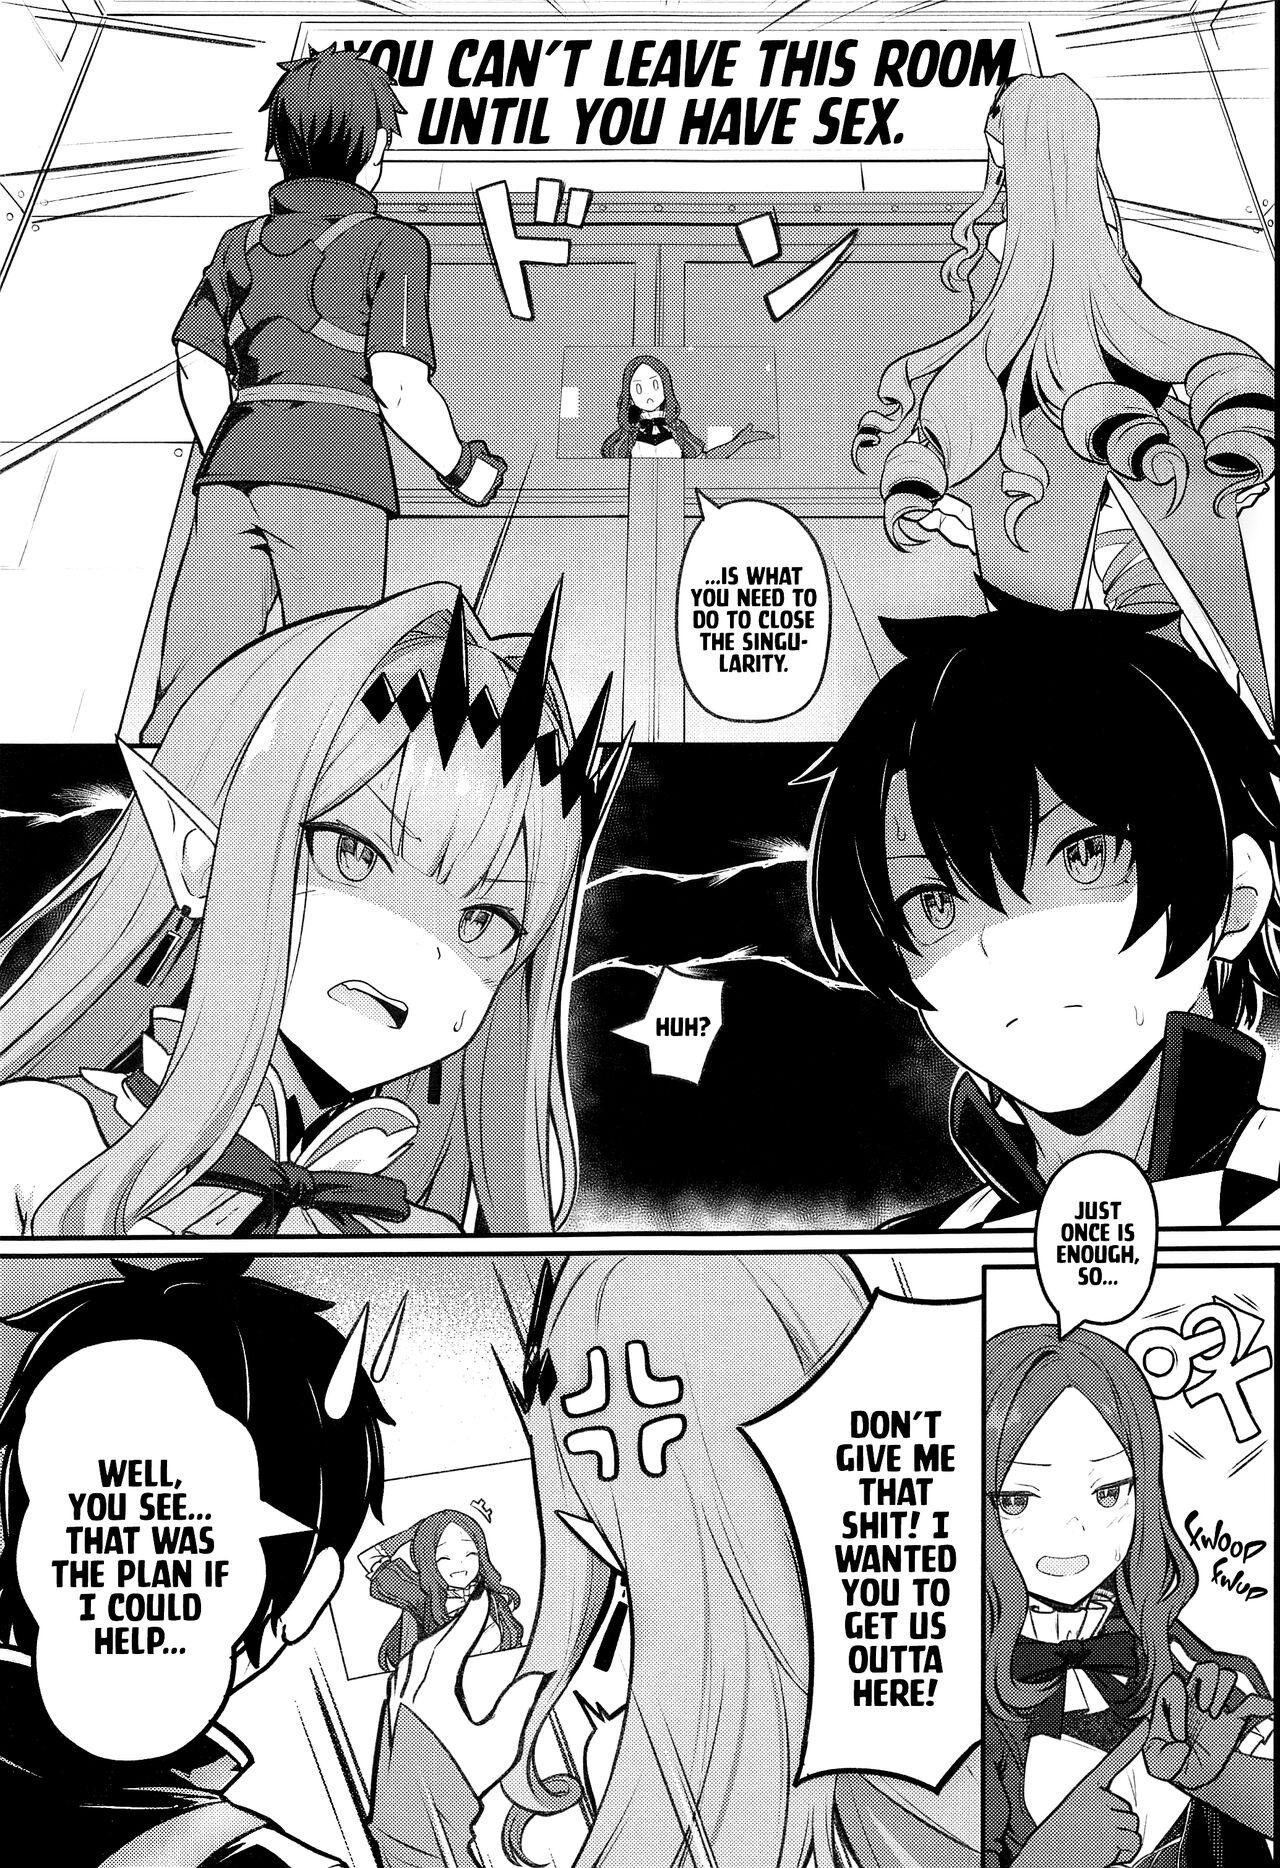 Pinoy Baobhan Sith to SEX Shinai to Derarenai Heya | Baobhan Sith and I Need to Have Sex or Else We Can't Leave This Room! - Fate grand order Women Sucking - Page 2